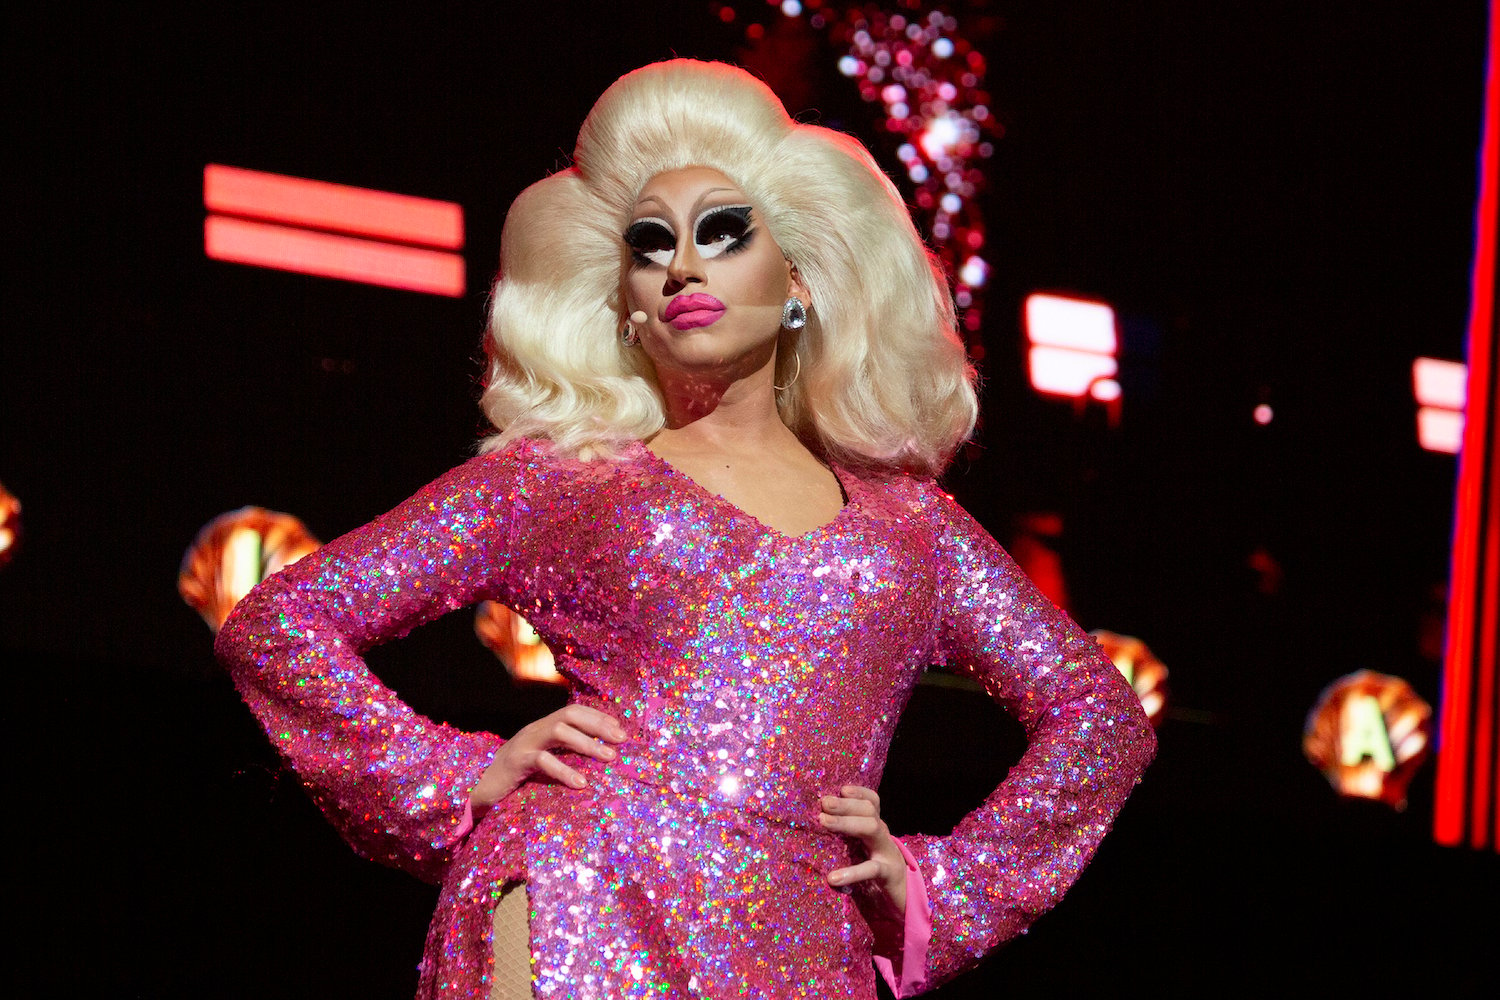 Trixie Mattel Thought Doing Anything ‘Yeehaw’ for the ‘C’Mon Loretta’ Music Video Was ‘Obvious’